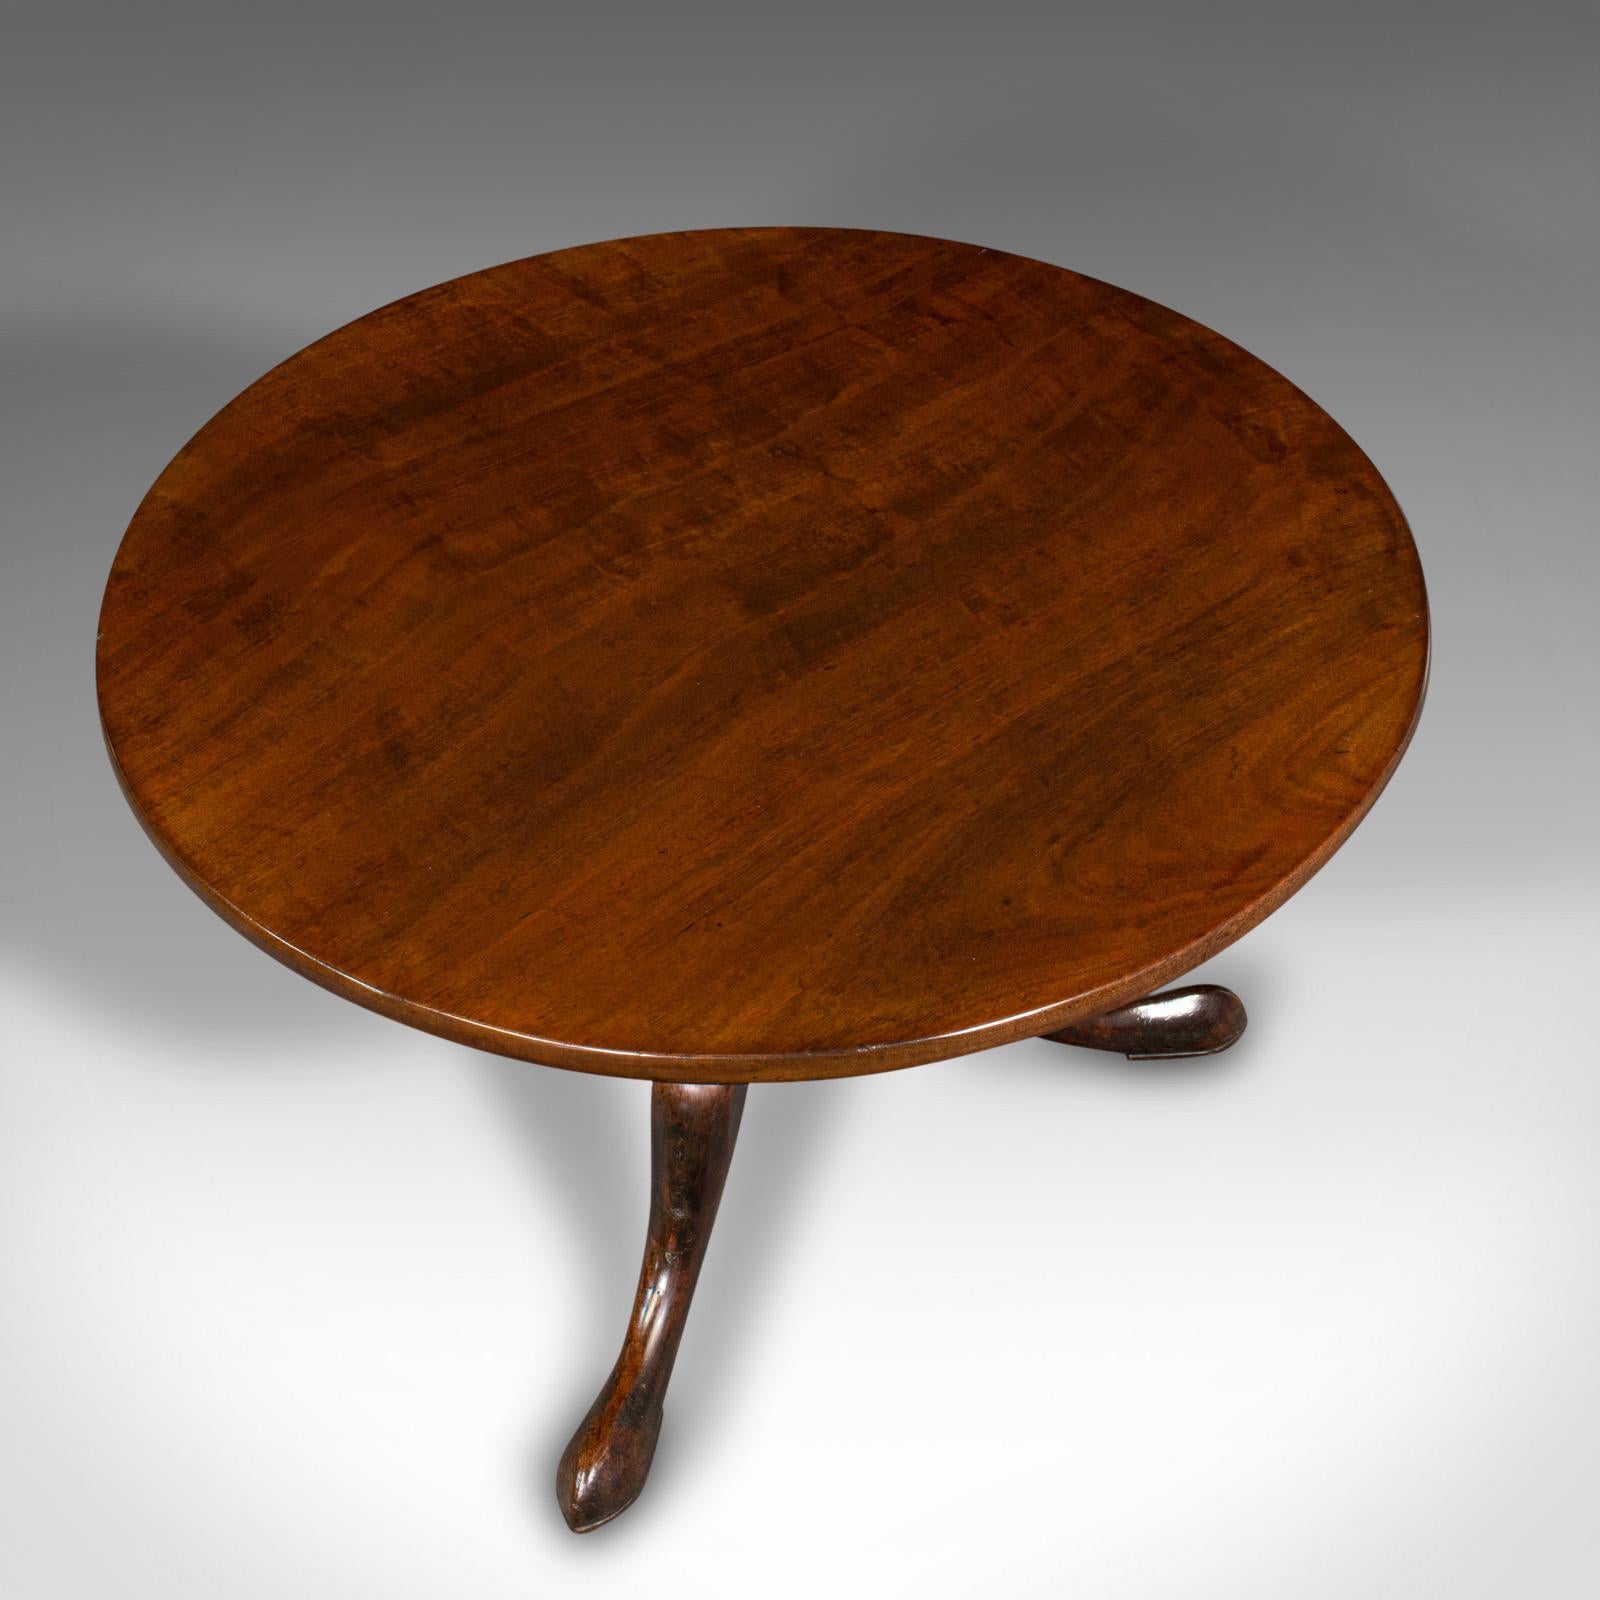 Wood Antique Tilt Top Table, English, Wine, Afternoon Tea, Early Georgian, Circa 1750 For Sale